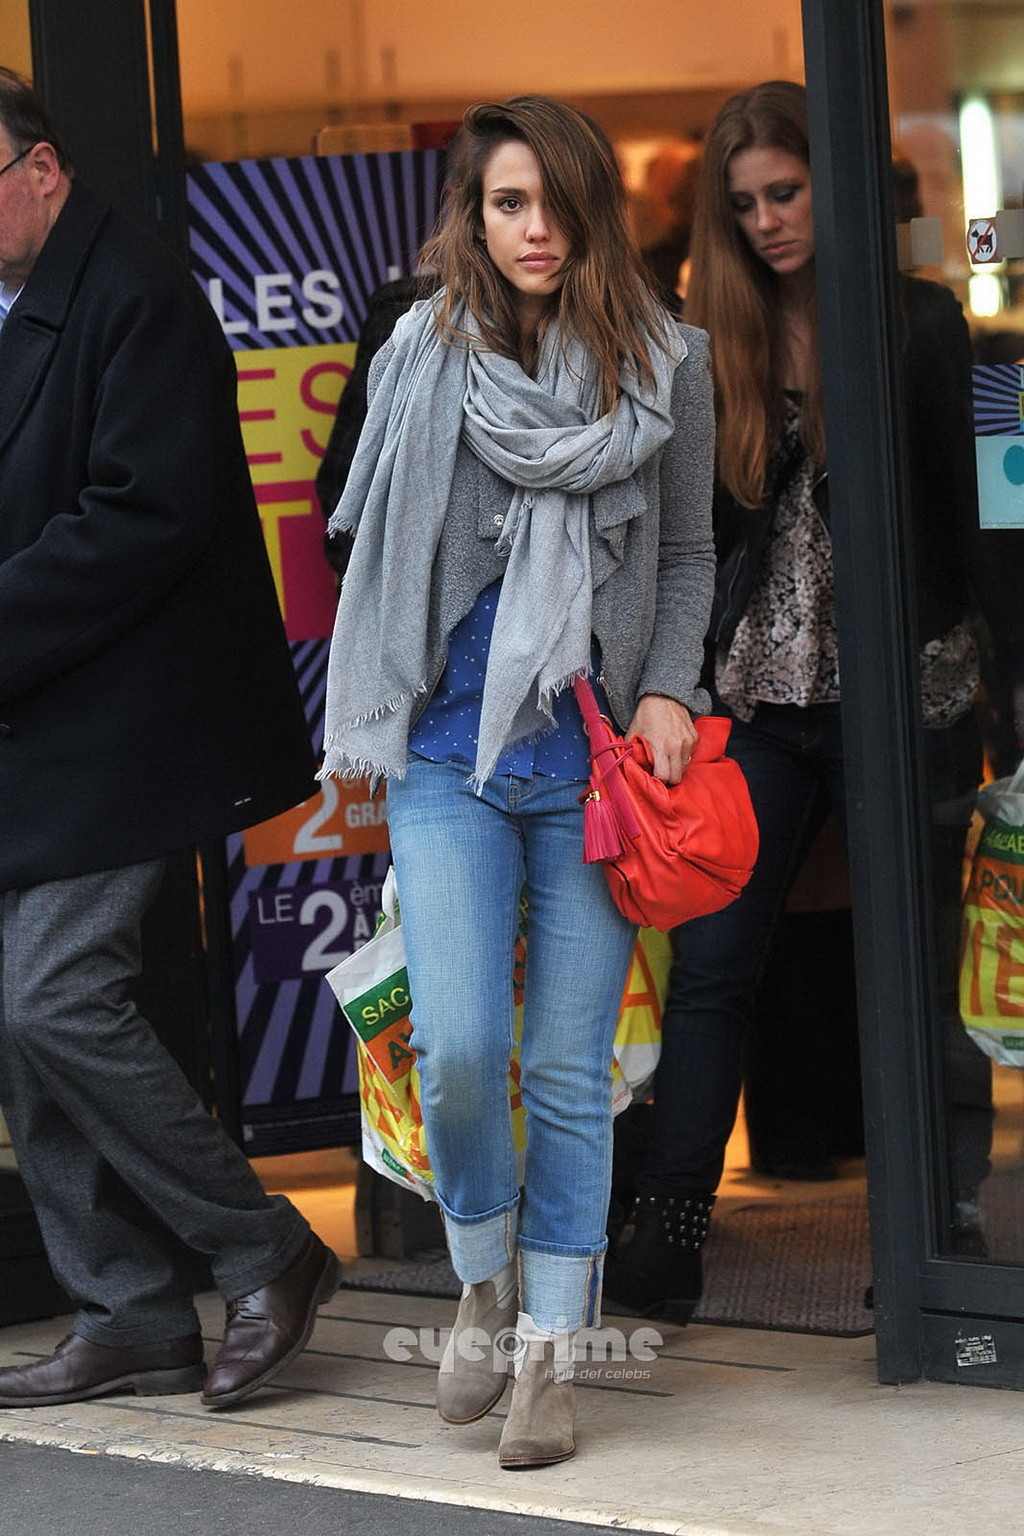 Jessica Alba booty in jeans while shopping in Paris #75272133